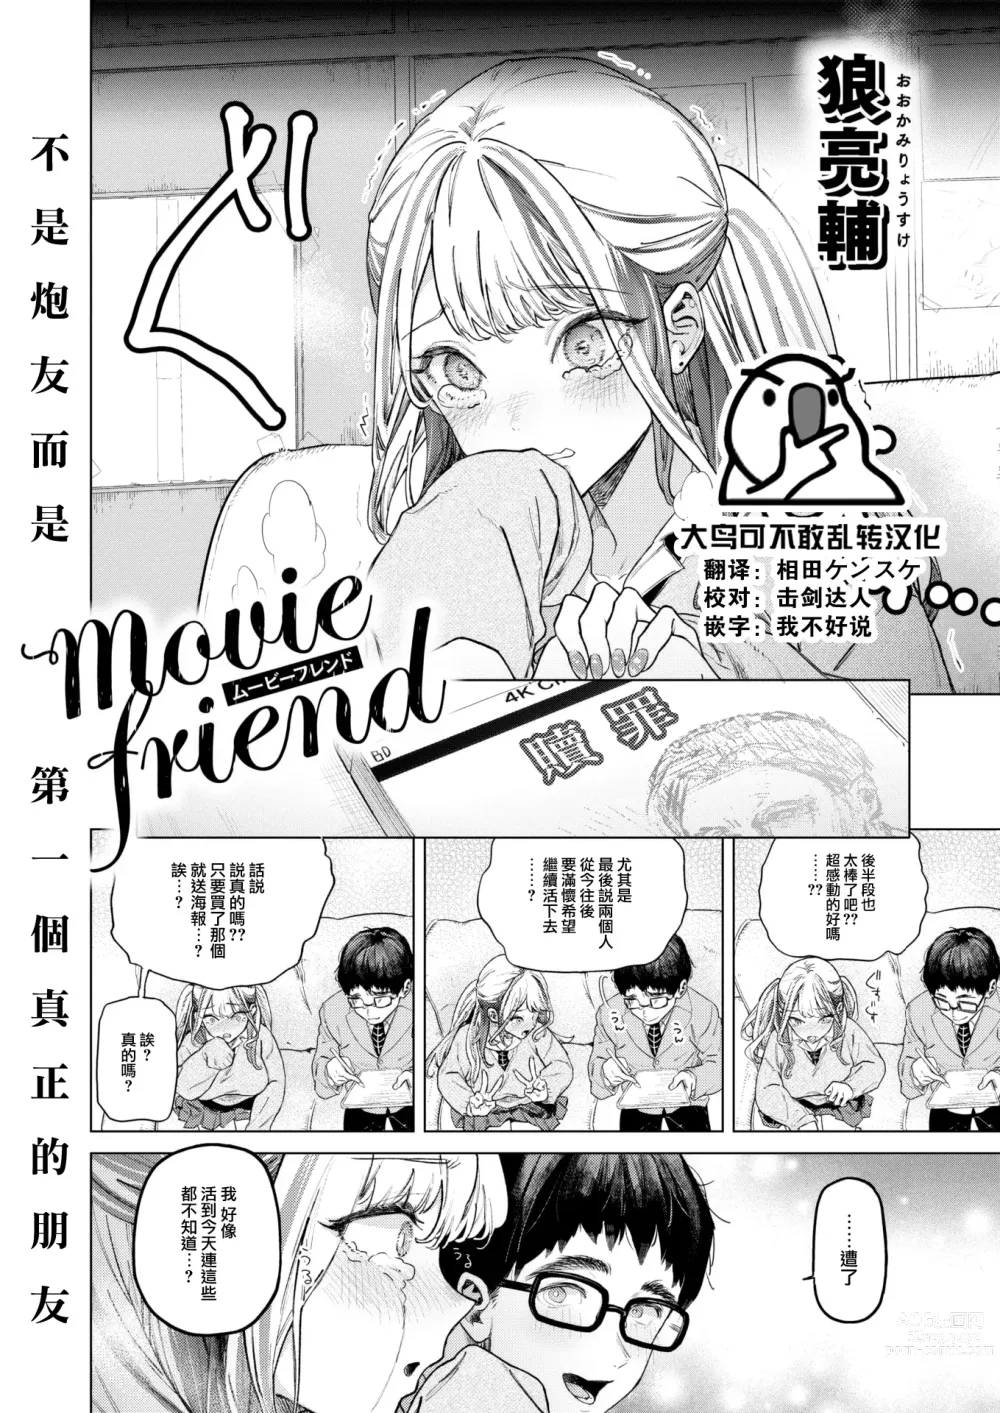 Page 41 of doujinshi movie friend (decensored)